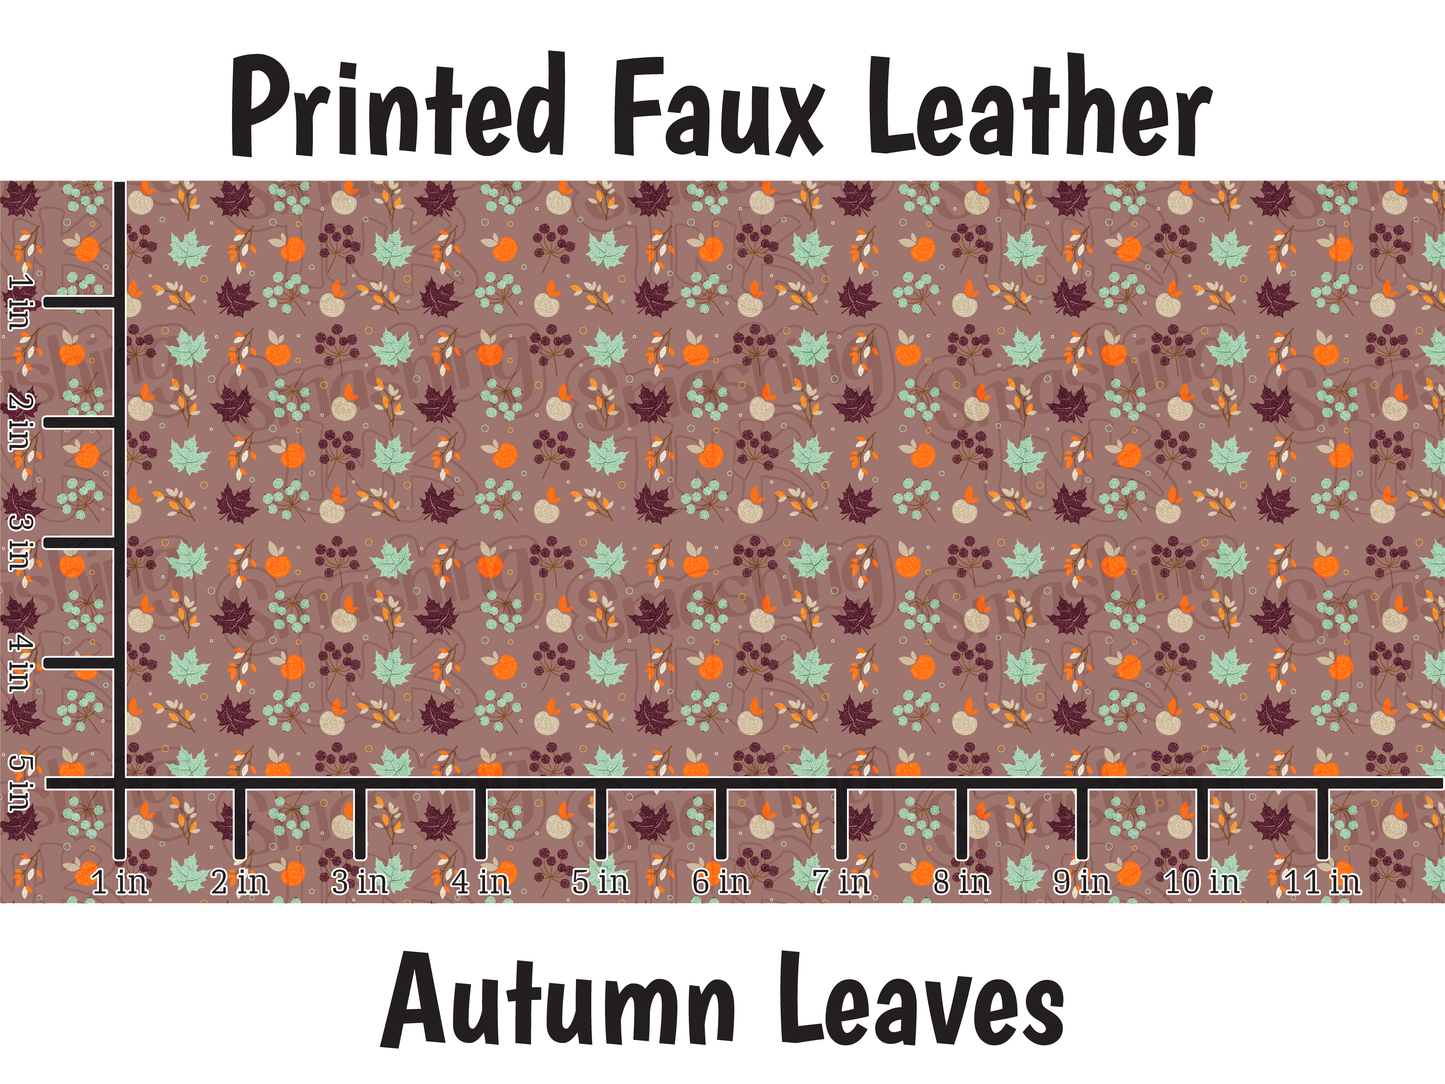 Autumn Leaves - Faux Leather Sheet (SHIPS IN 3 BUS DAYS)